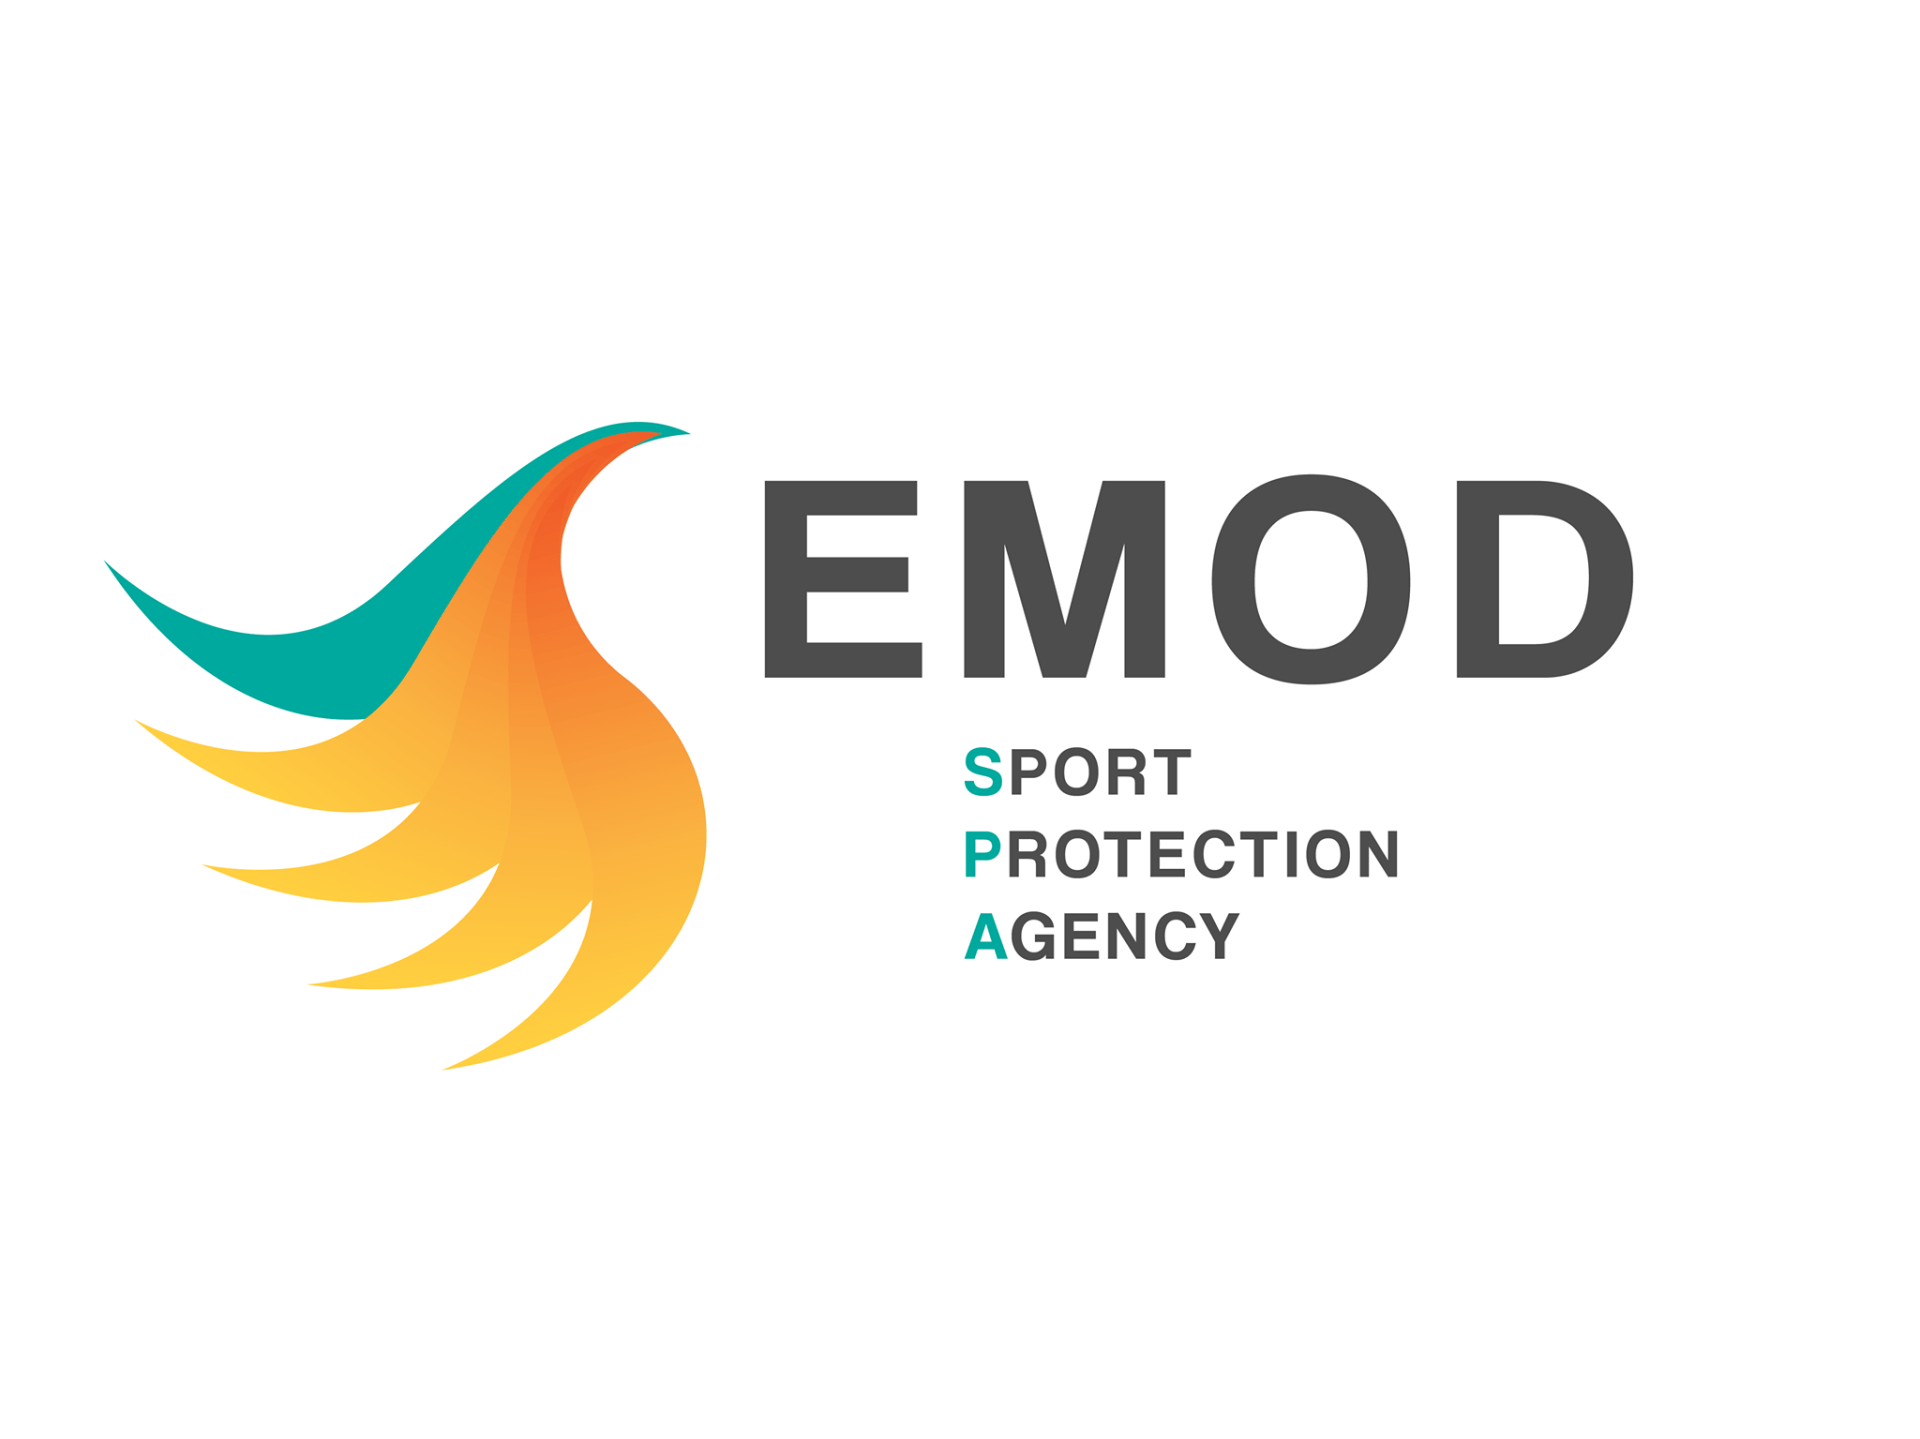 EMOD Sport Protection Agency